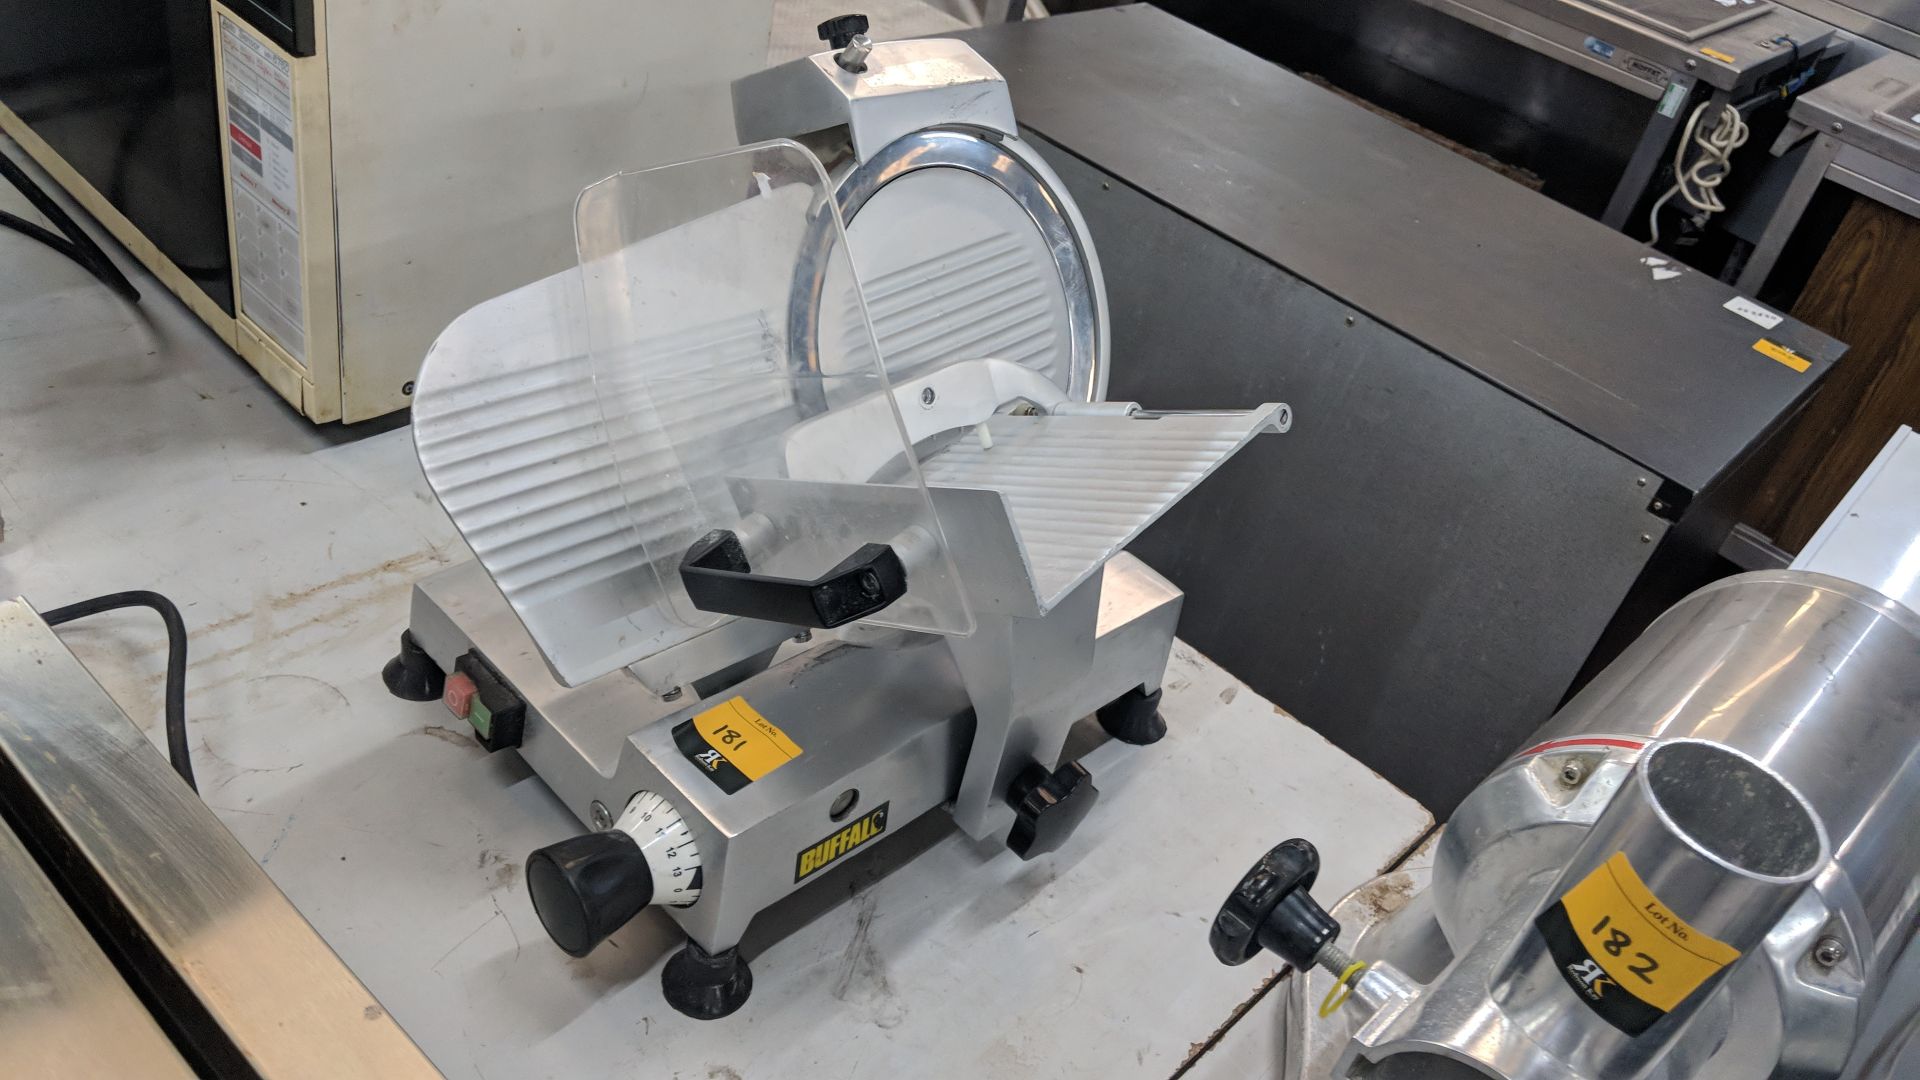 Buffalo electric meat slicer IMPORTANT: Please remember goods successfully bid upon must be paid for